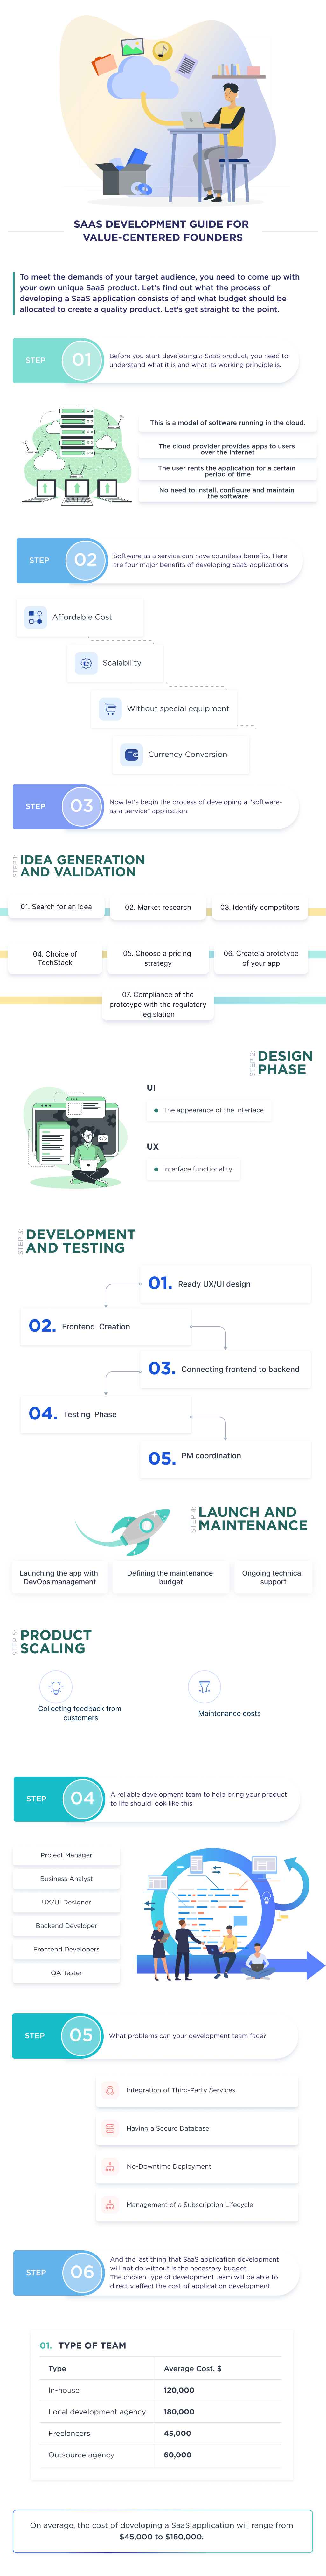 This infographic describes the detailed process of how to develop a software-as-a-service application from scratch.